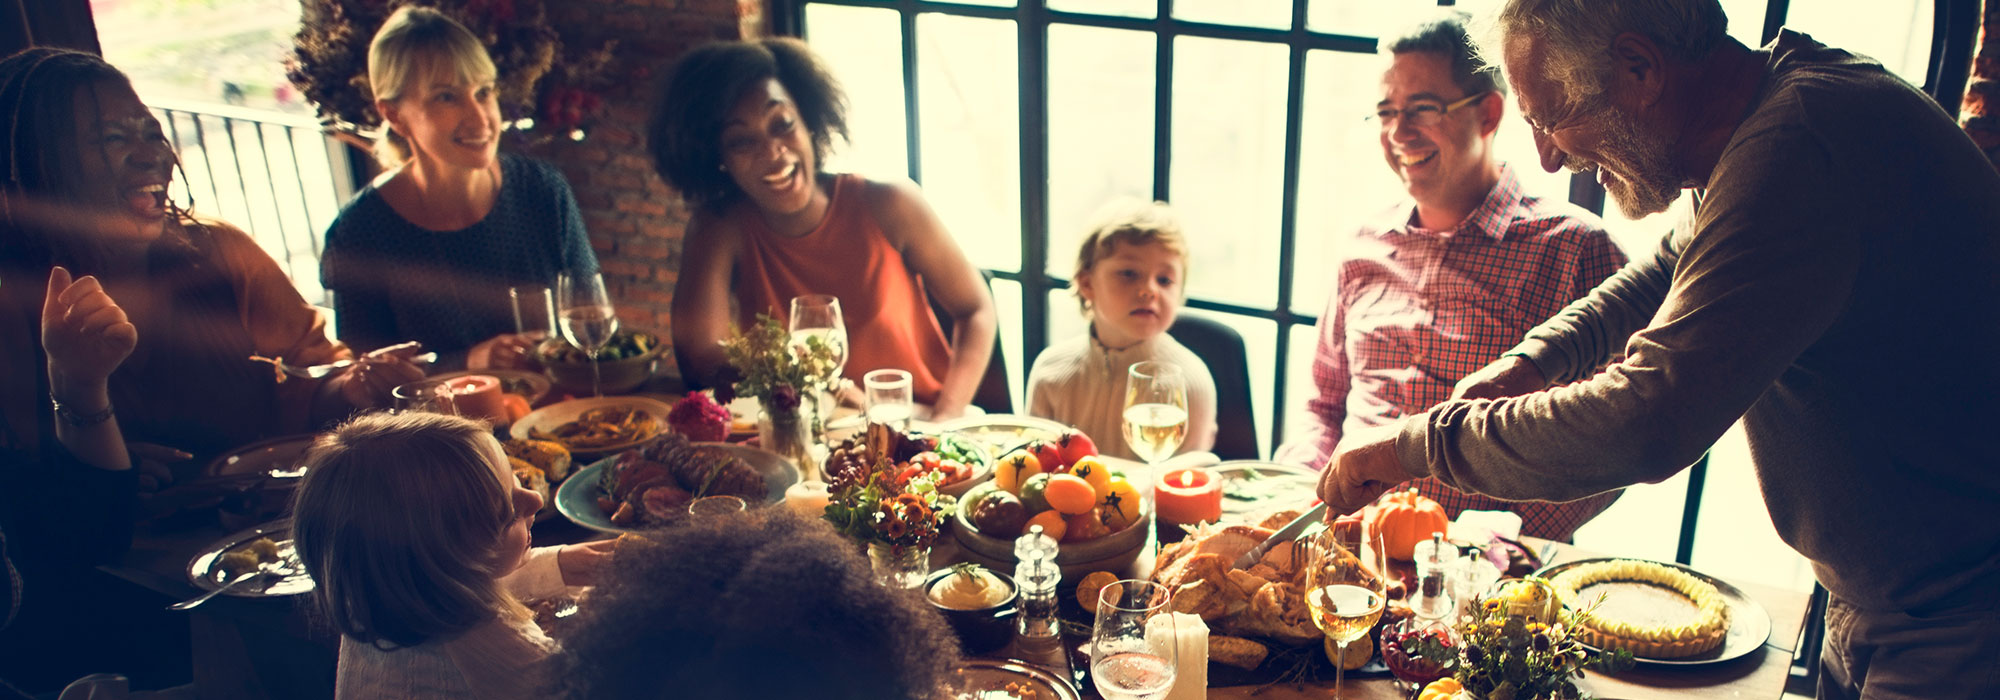 5 Easy Ways to Make Your Thanksgiving Greener